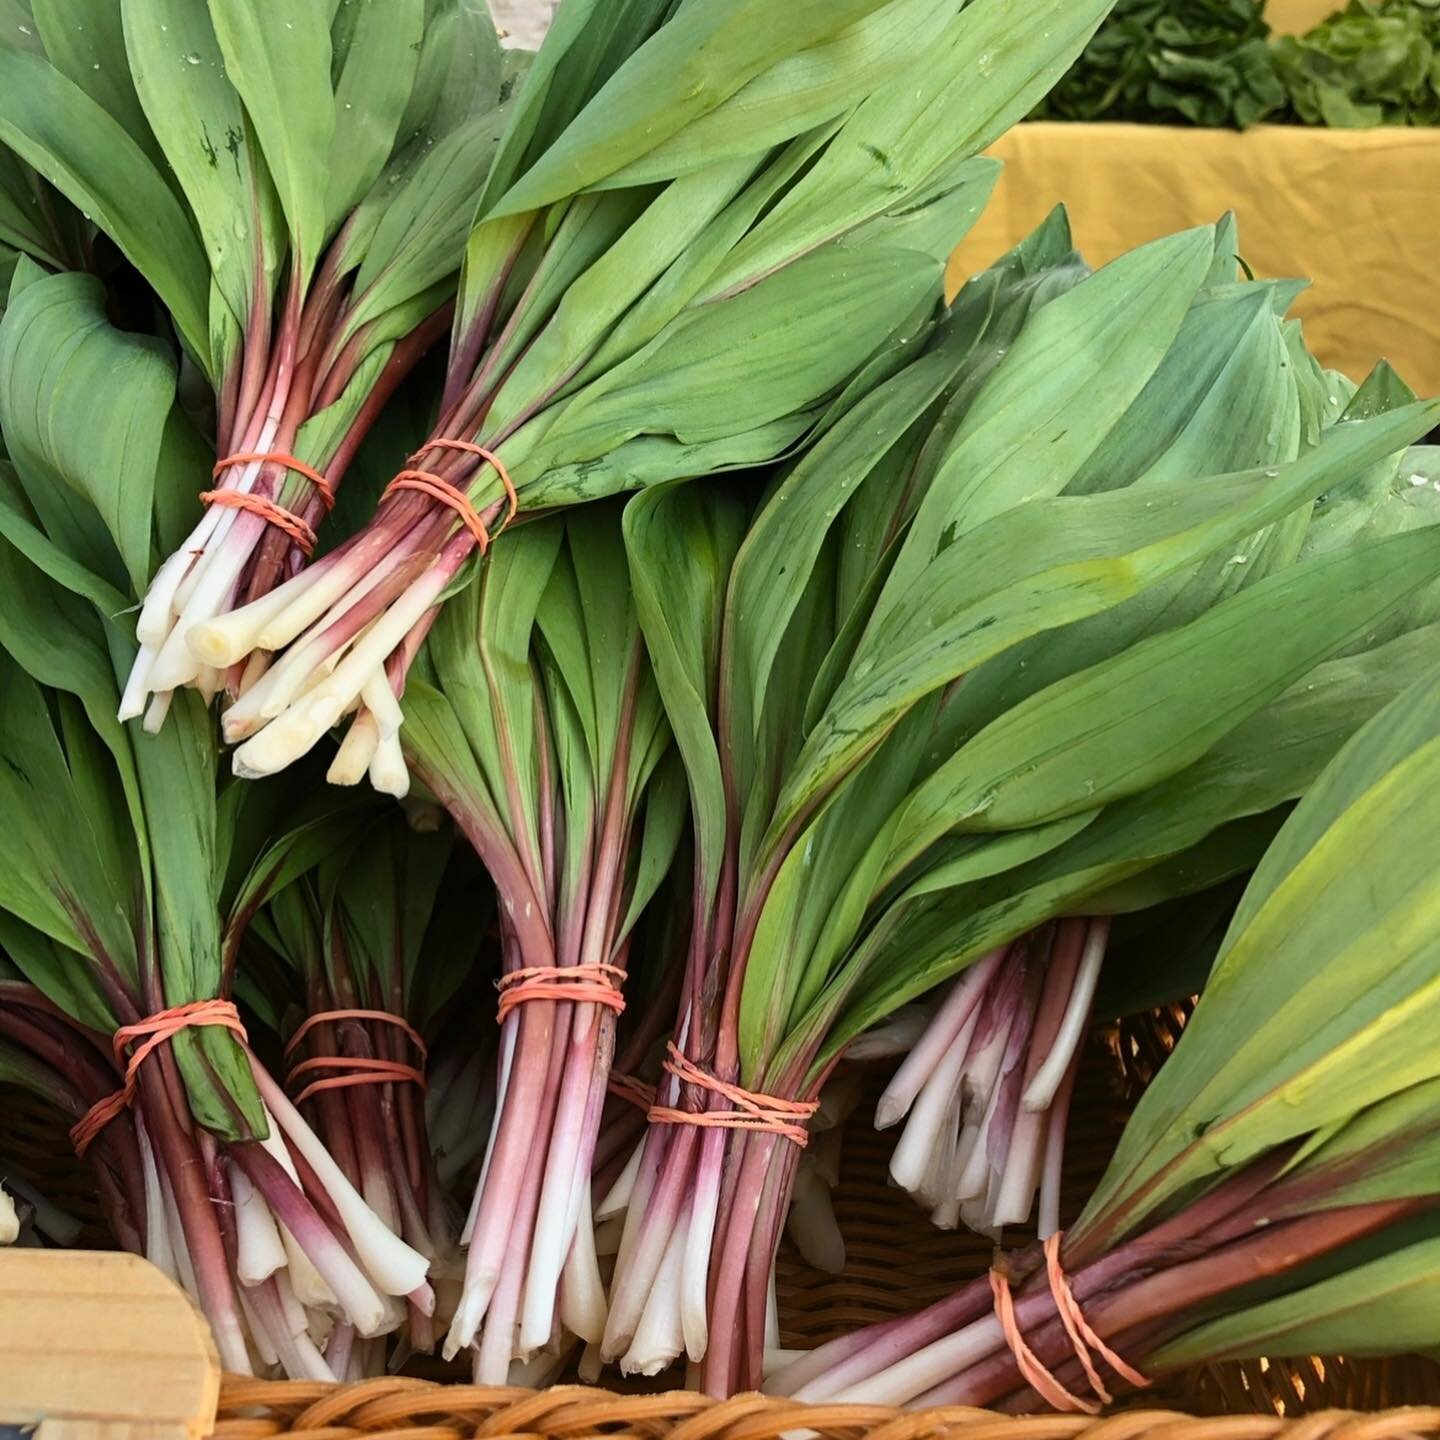 Today is our last winter market and we have turned full steam ahead towards spring!

Find ramps, greens + tulips @thousandleafgardens, a bajillion (not an exaggeration) garden seedlings and veggies at @deeprootsfarmny, amazing local honey from @flyho